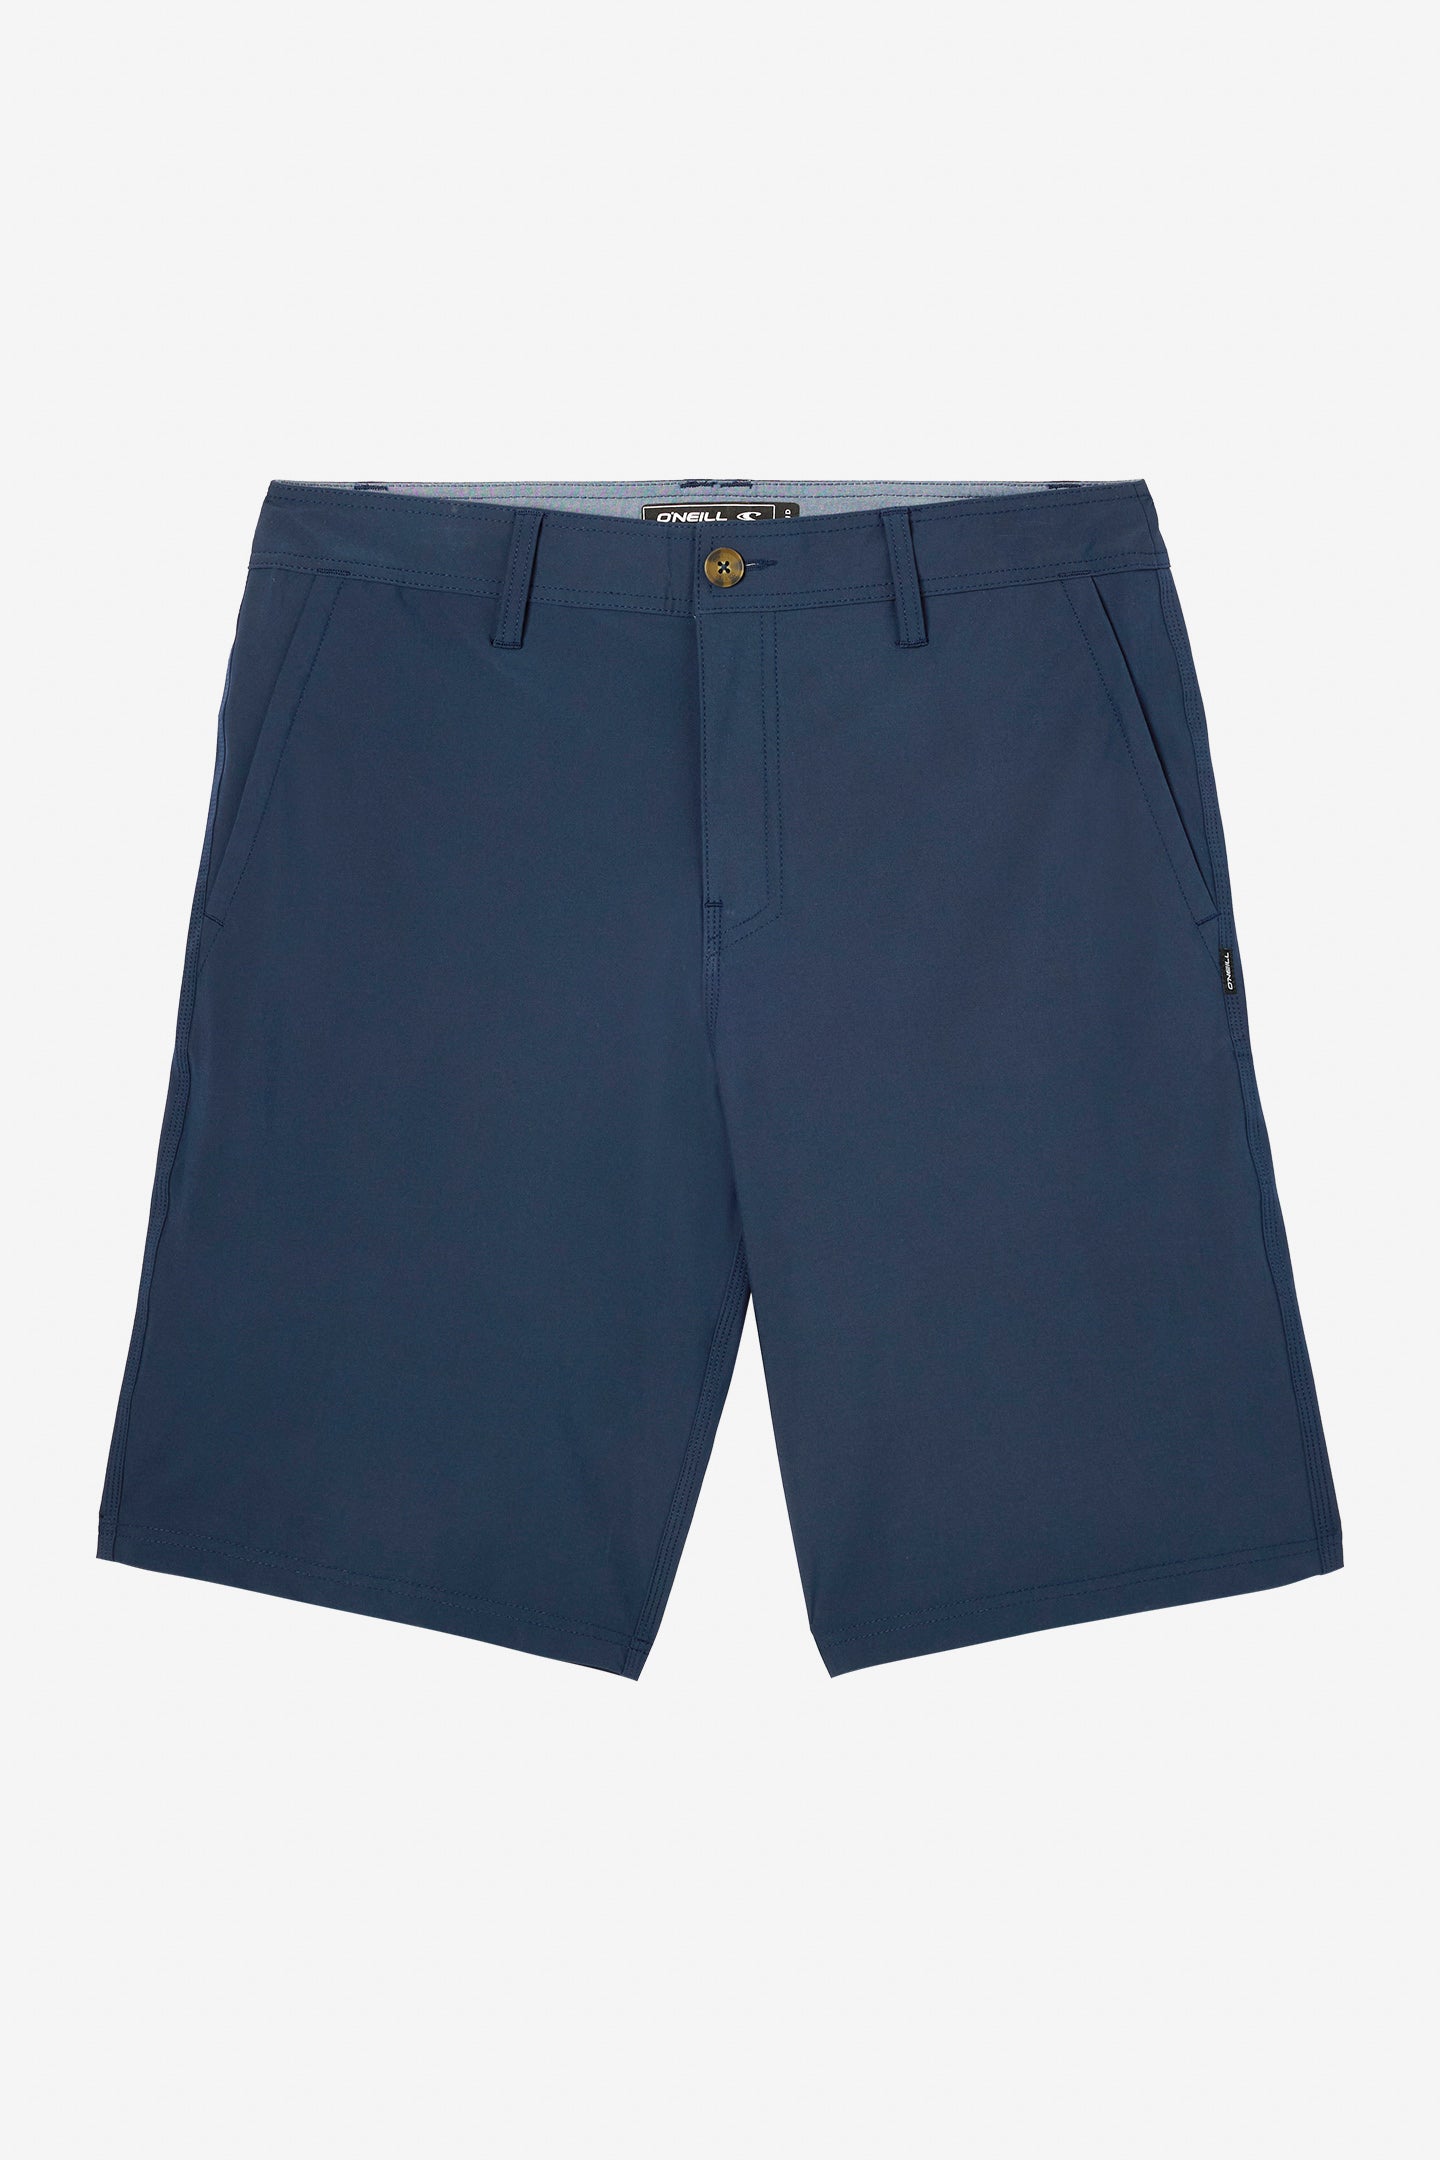 Reserve Solid 21-Navy | O'Neill